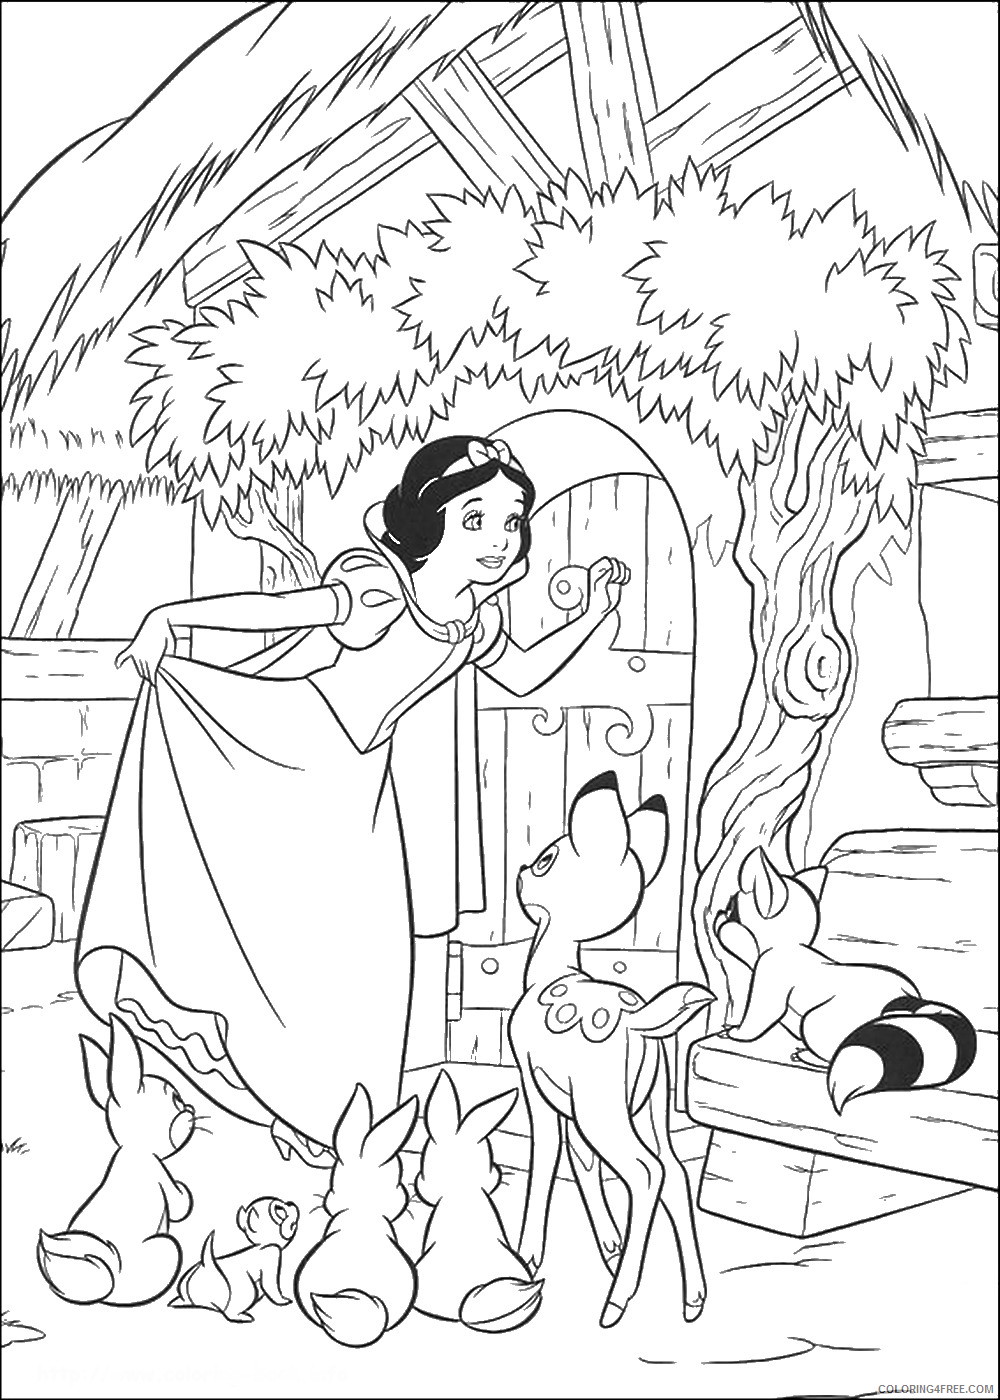 Snow White Coloring Pages Cartoons snow_white_cl_70 Printable 2020 5745 Coloring4free